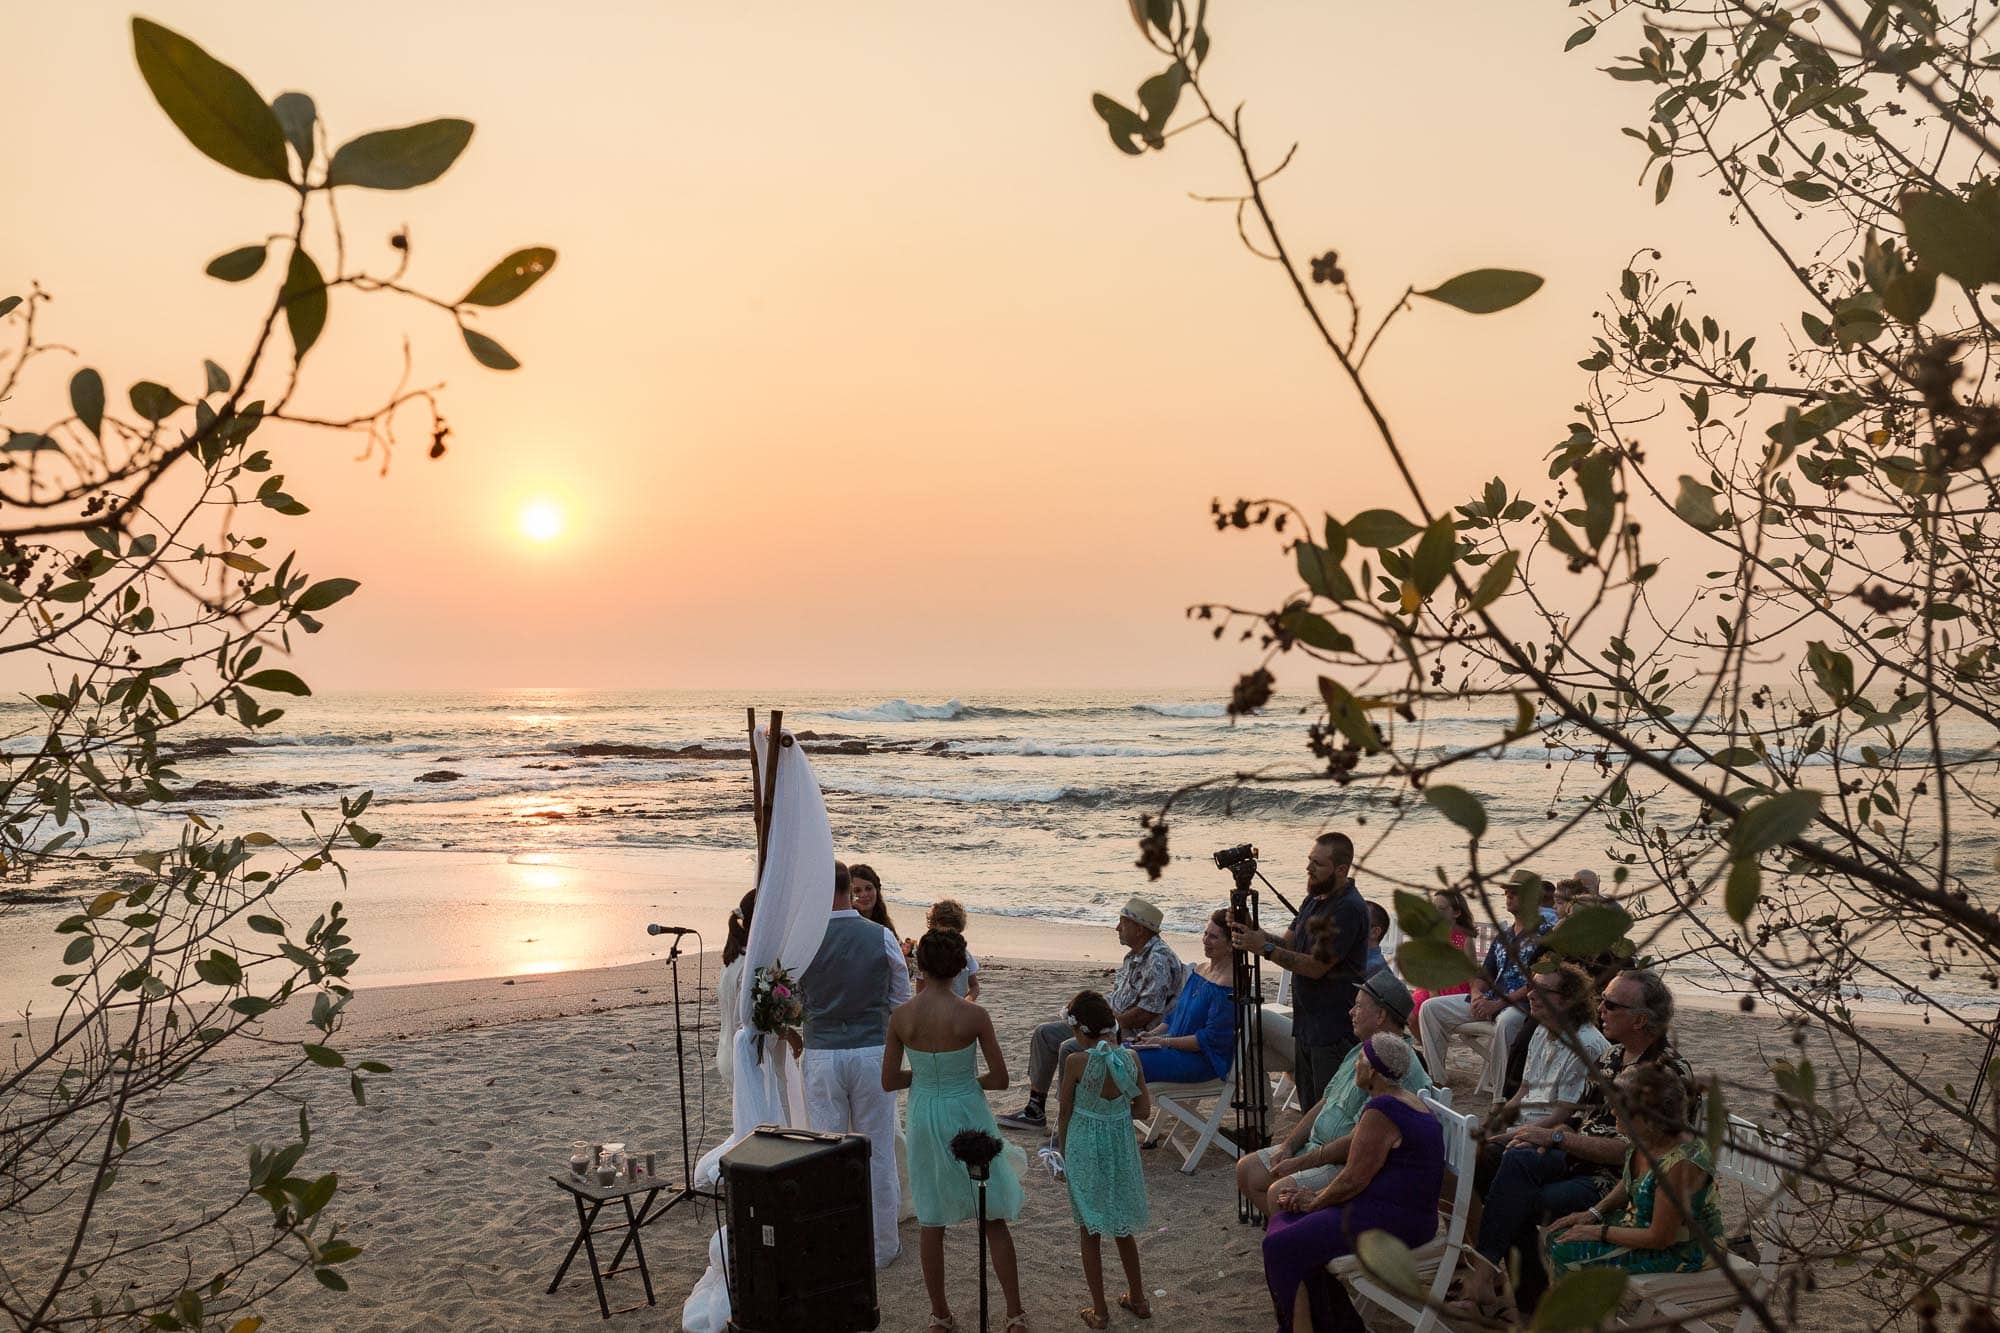 The picturesque ceremony on the beach at sunset.